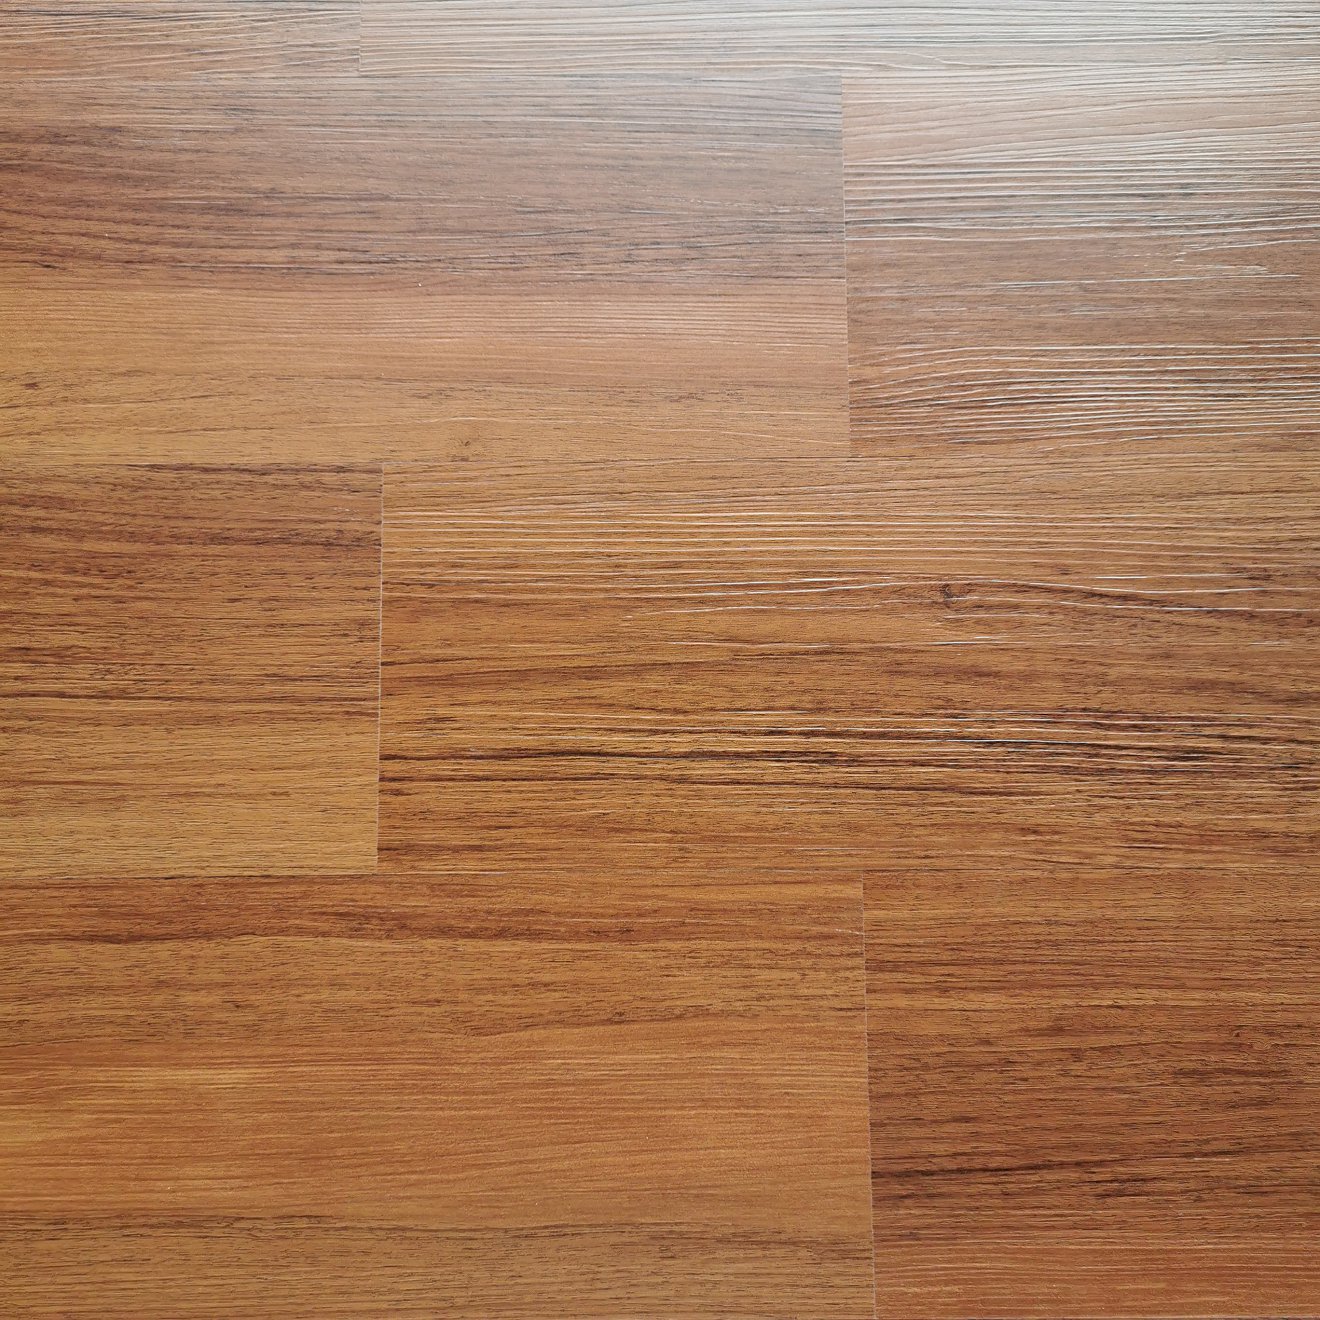 Factory Promotional Beautiful Hardwood Floors -
 LVT Flooring Use in Commercial Flooring Material Project from China Manufacture Vinyl Flooring Valinge Patent Click Indoor Hotel – Kangton